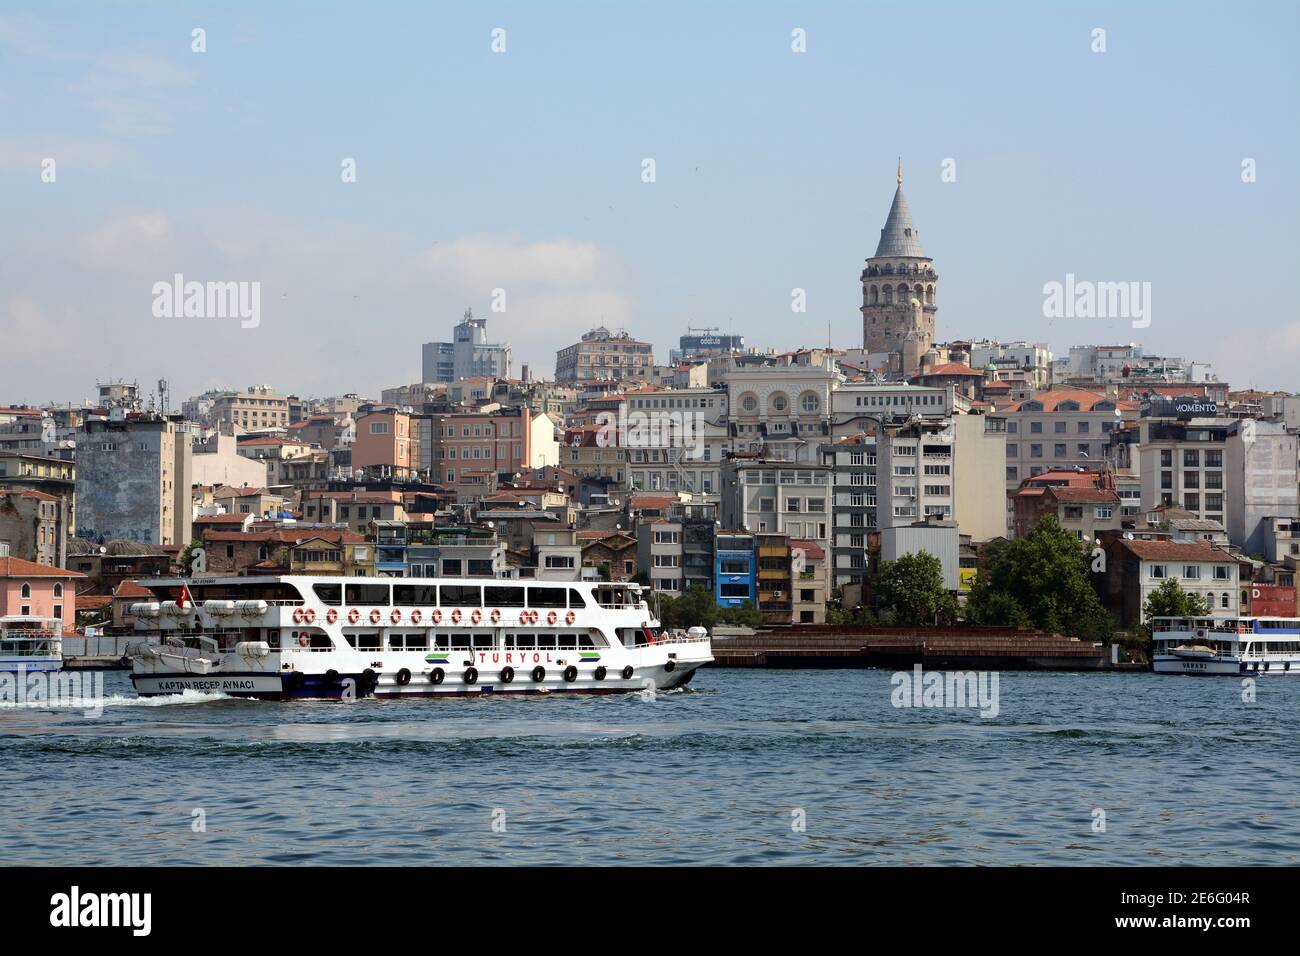 Galata tower and surrounding buildings looking across the golden horn from Eminonu in Istanbul, Turkey. Stock Photo